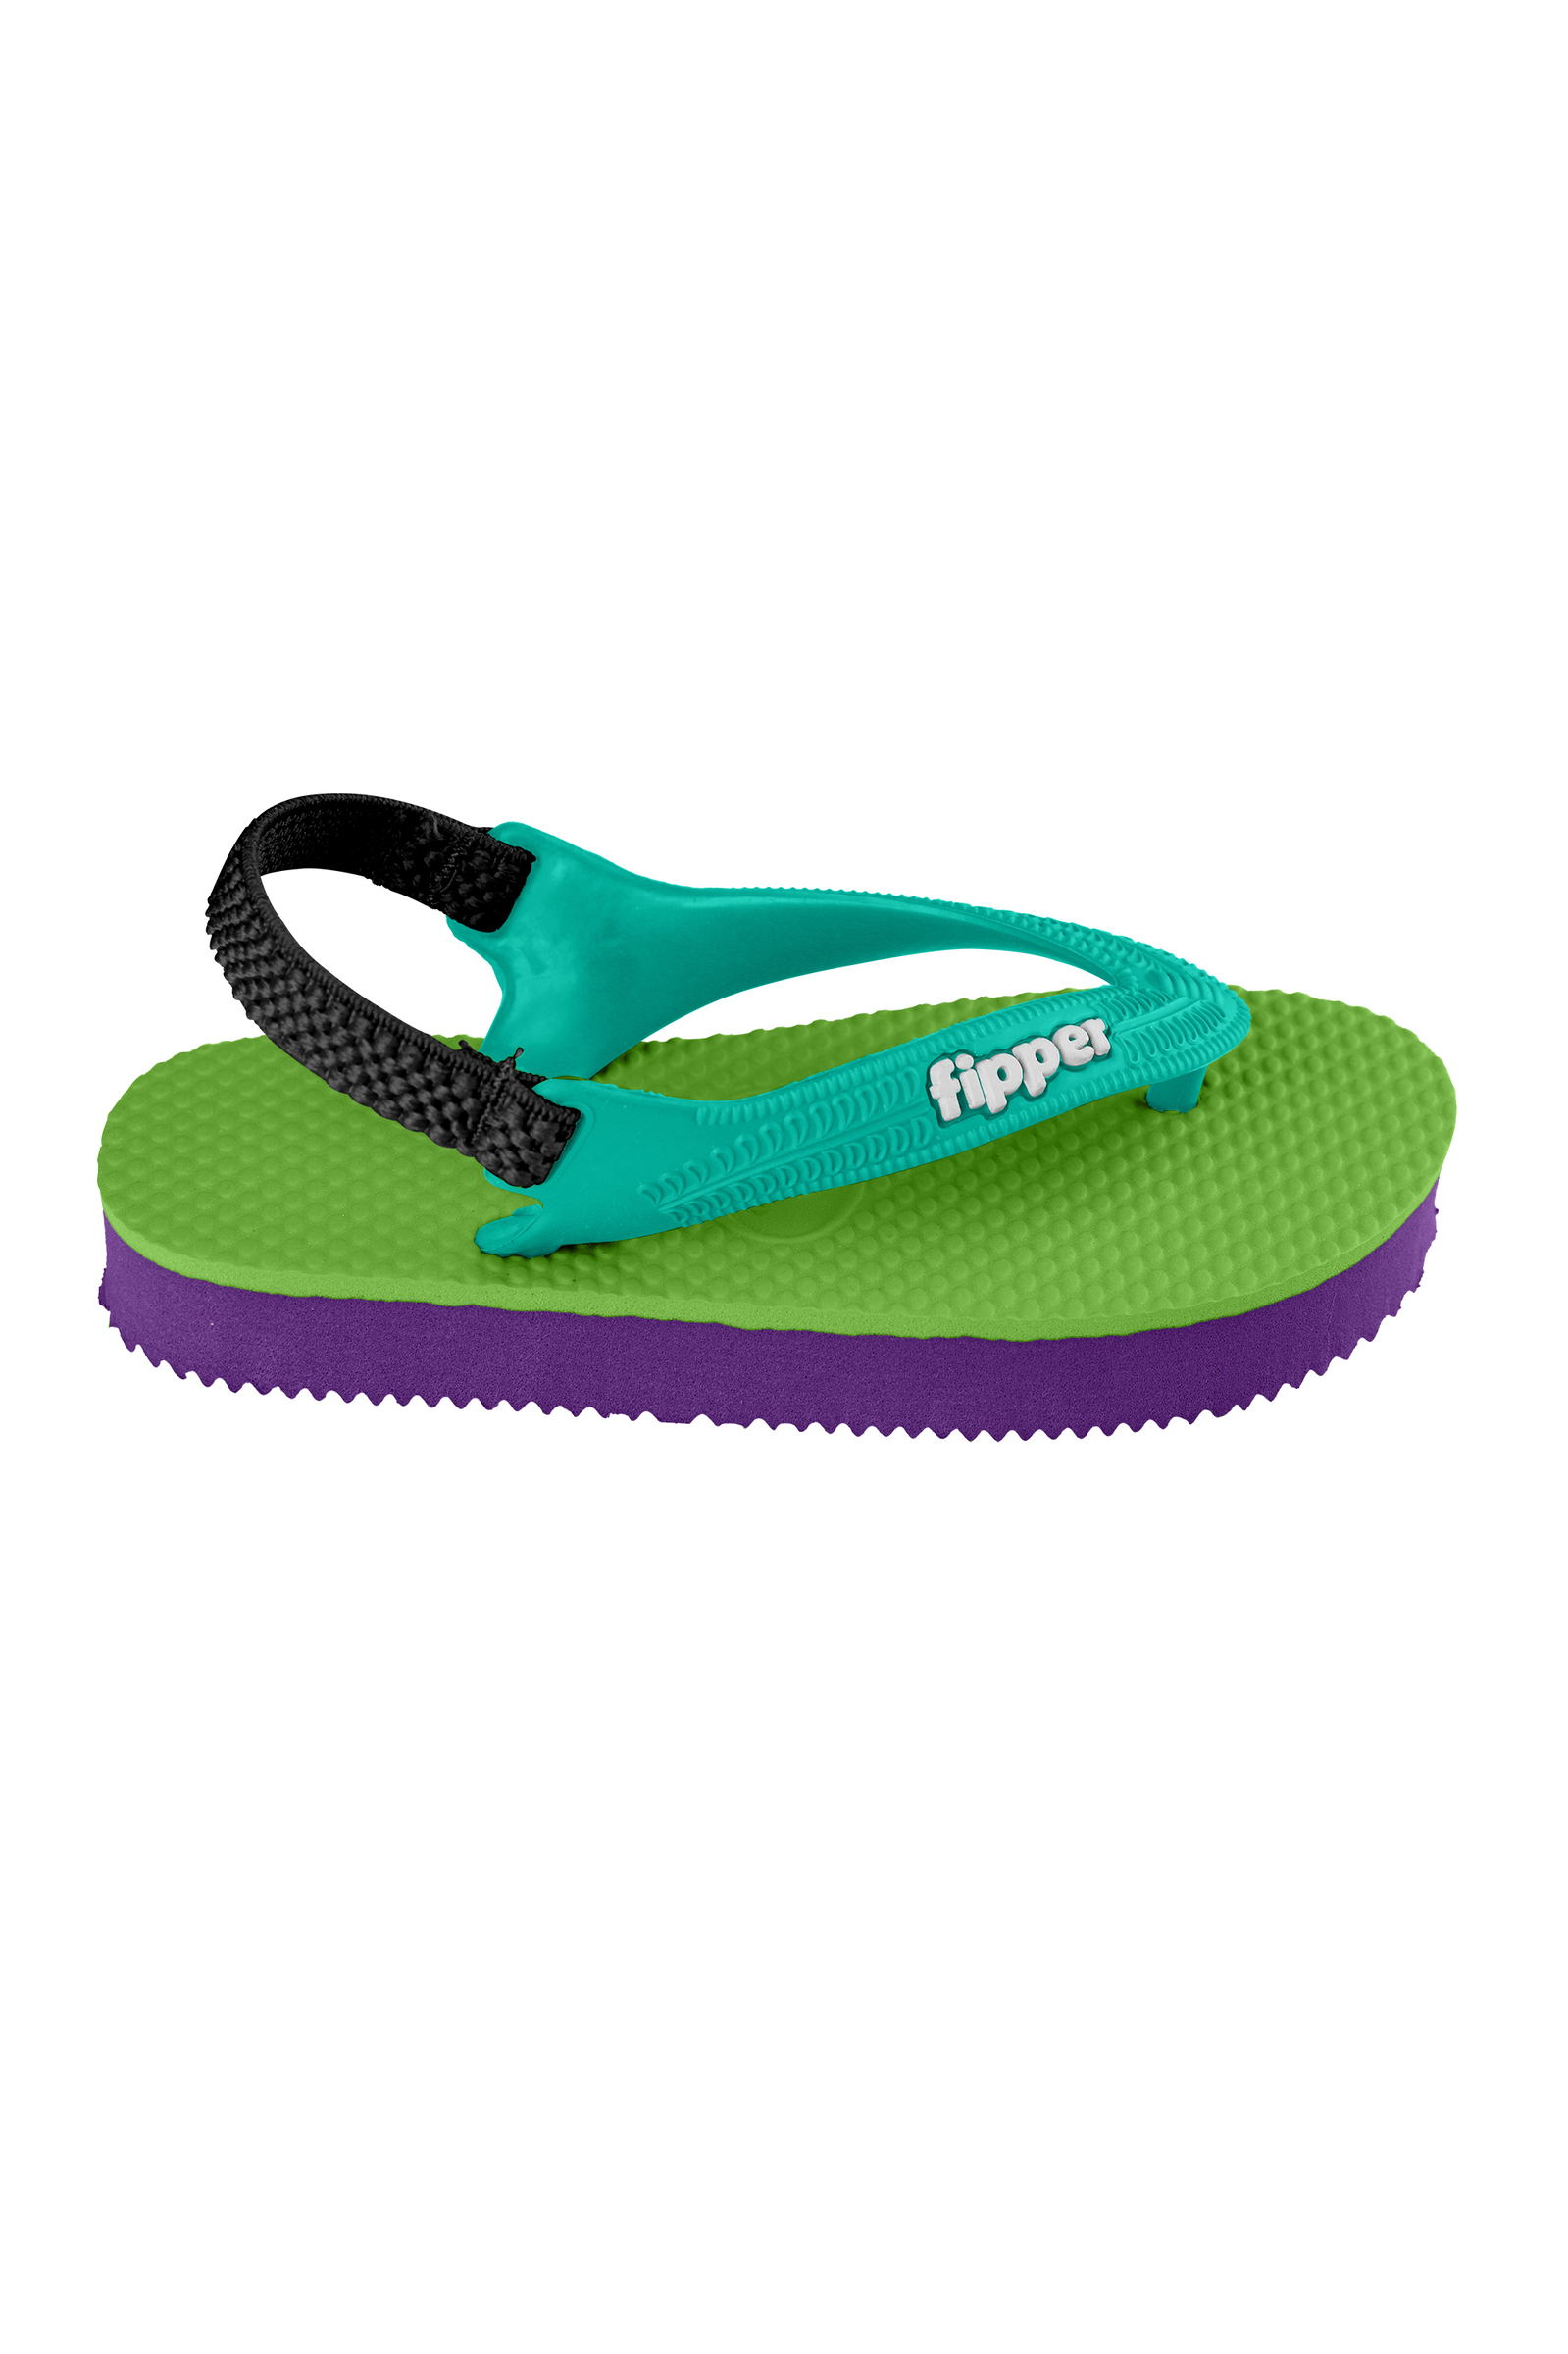 Fipper Todd's Rubber for Toddler in Green (Apple) / Purple (Mystery) / Turquoise